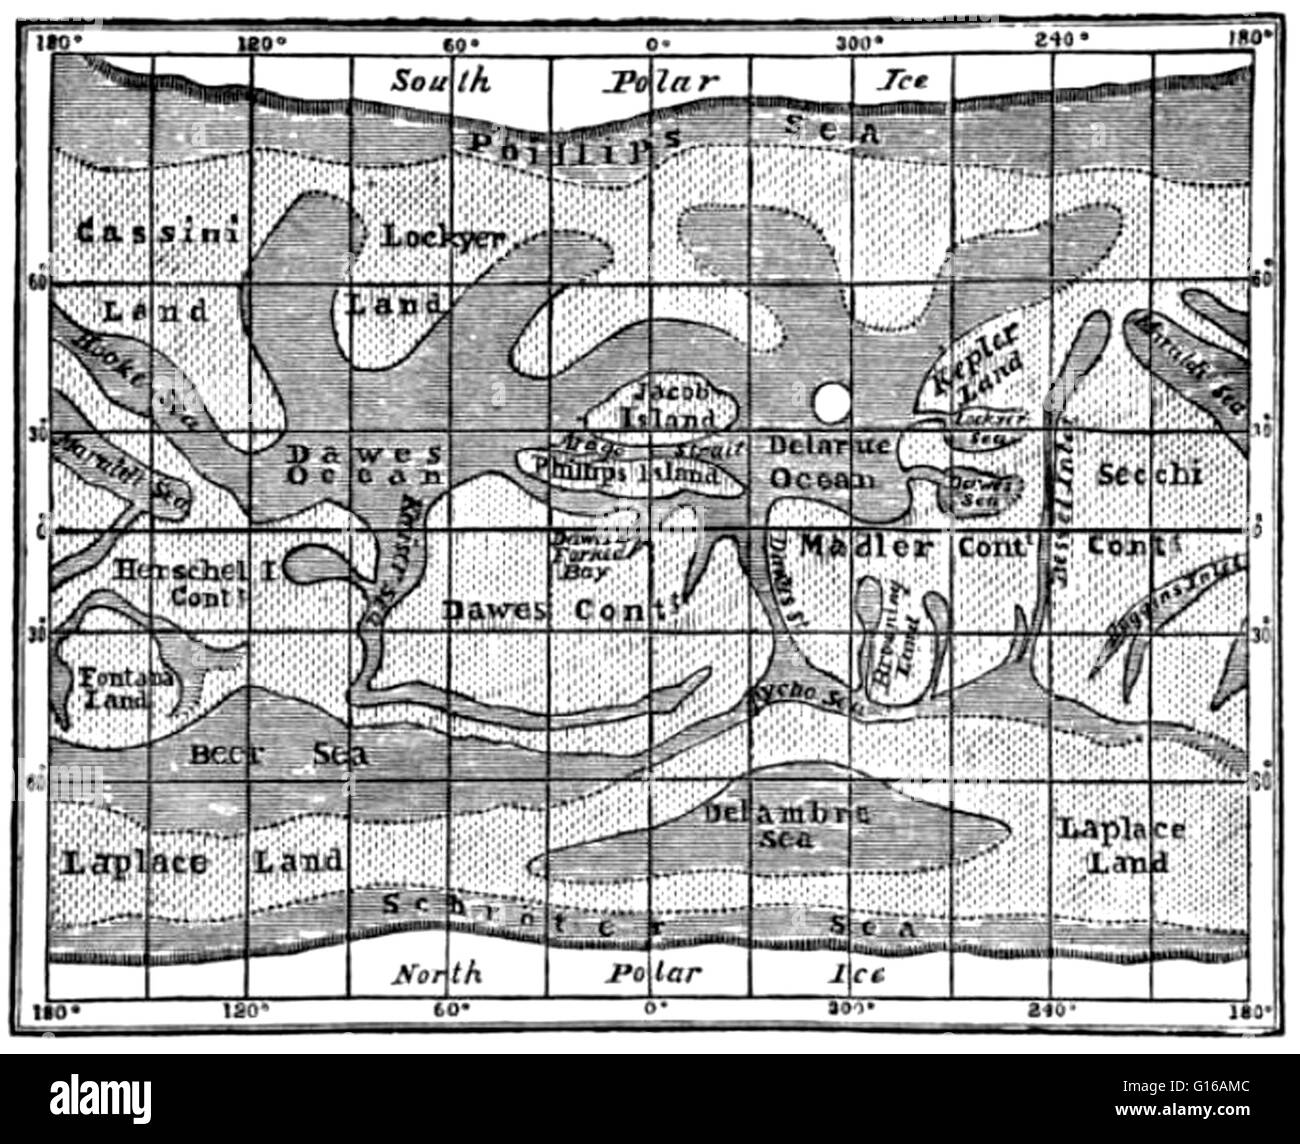 Mars Map. Richard Anthony Proctor (March 23, 1837 - September 12, 1888) was an English astronomer. He is best remembered for having produced one of the earliest maps of Mars in 1867 from 27 drawings by the English observer William Rutter Dawes. Proctor ea Stock Photo